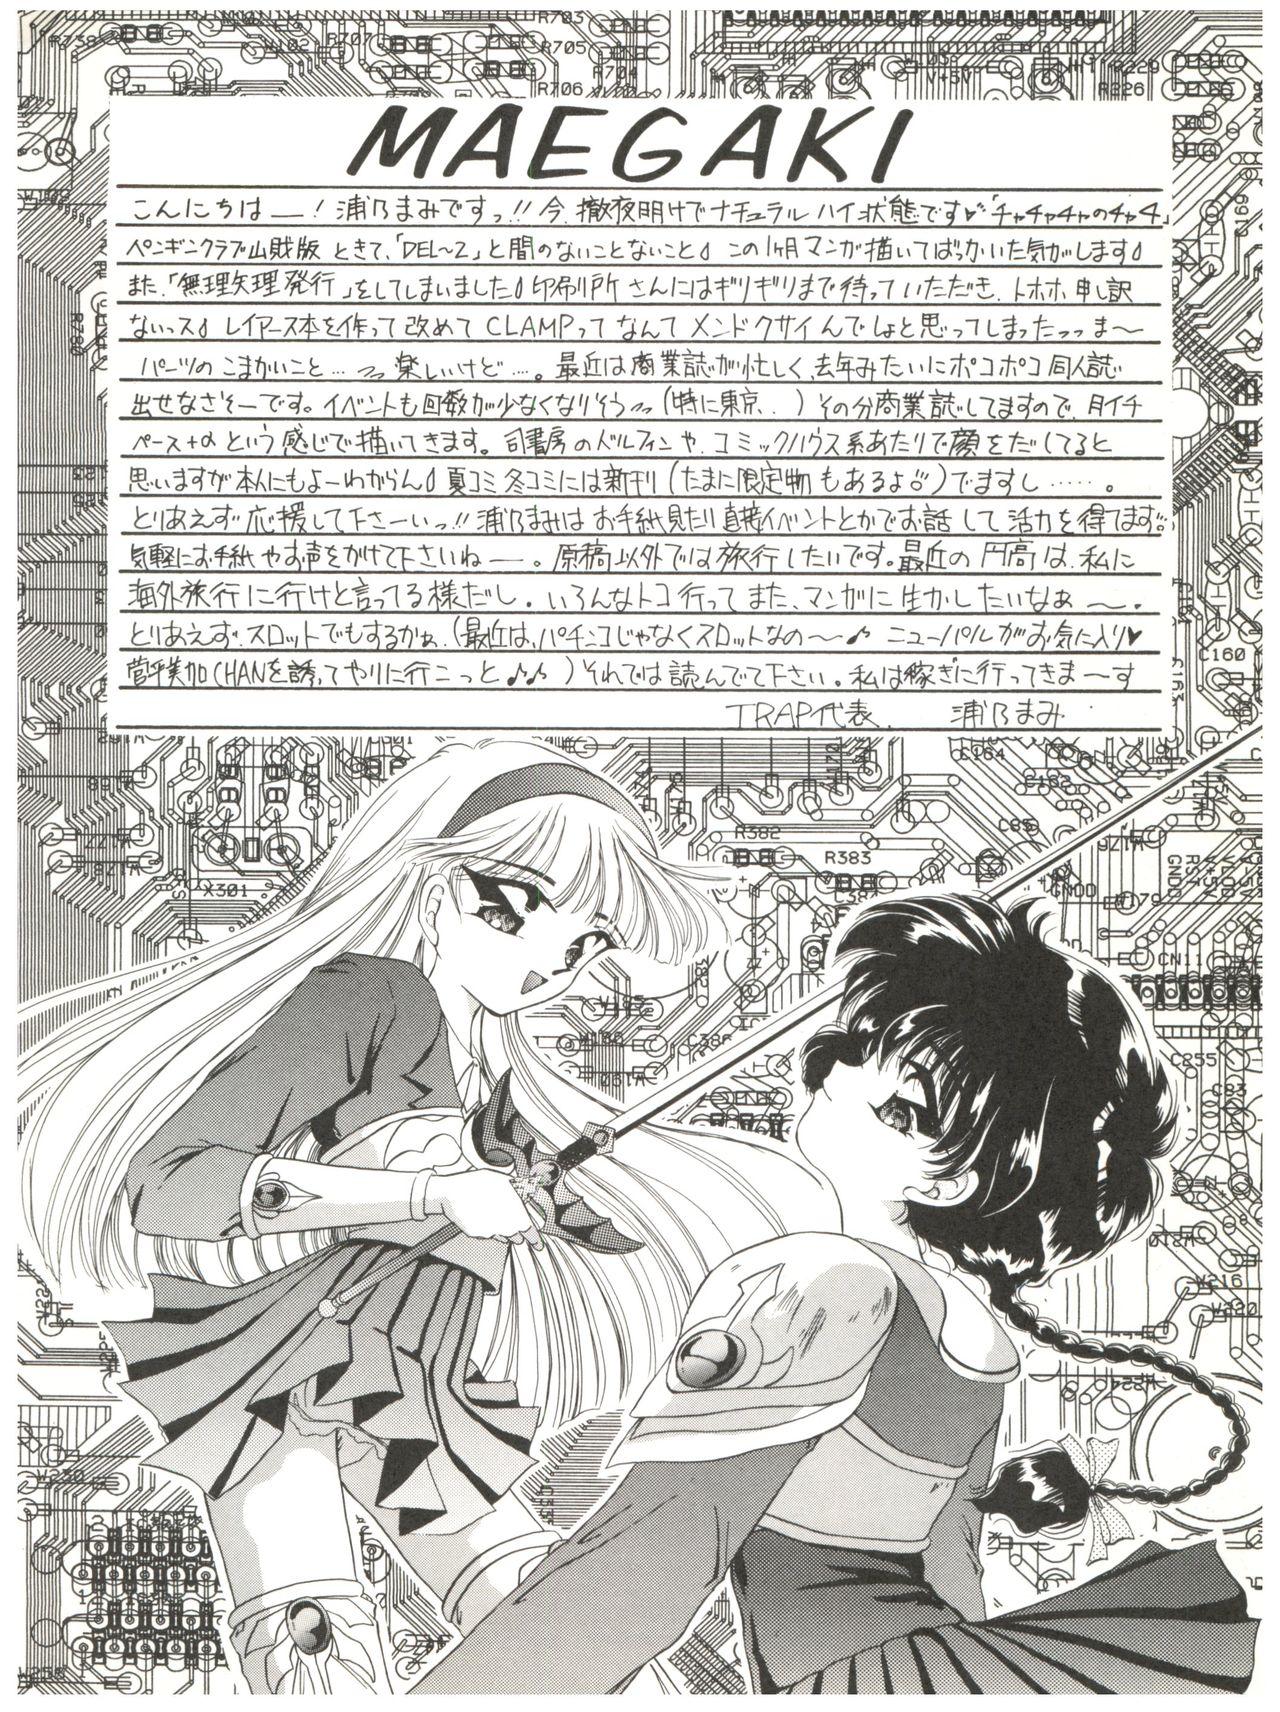 Real Amature Porn DELICIOUS 2nd STAGE - Magic knight rayearth Load - Page 4